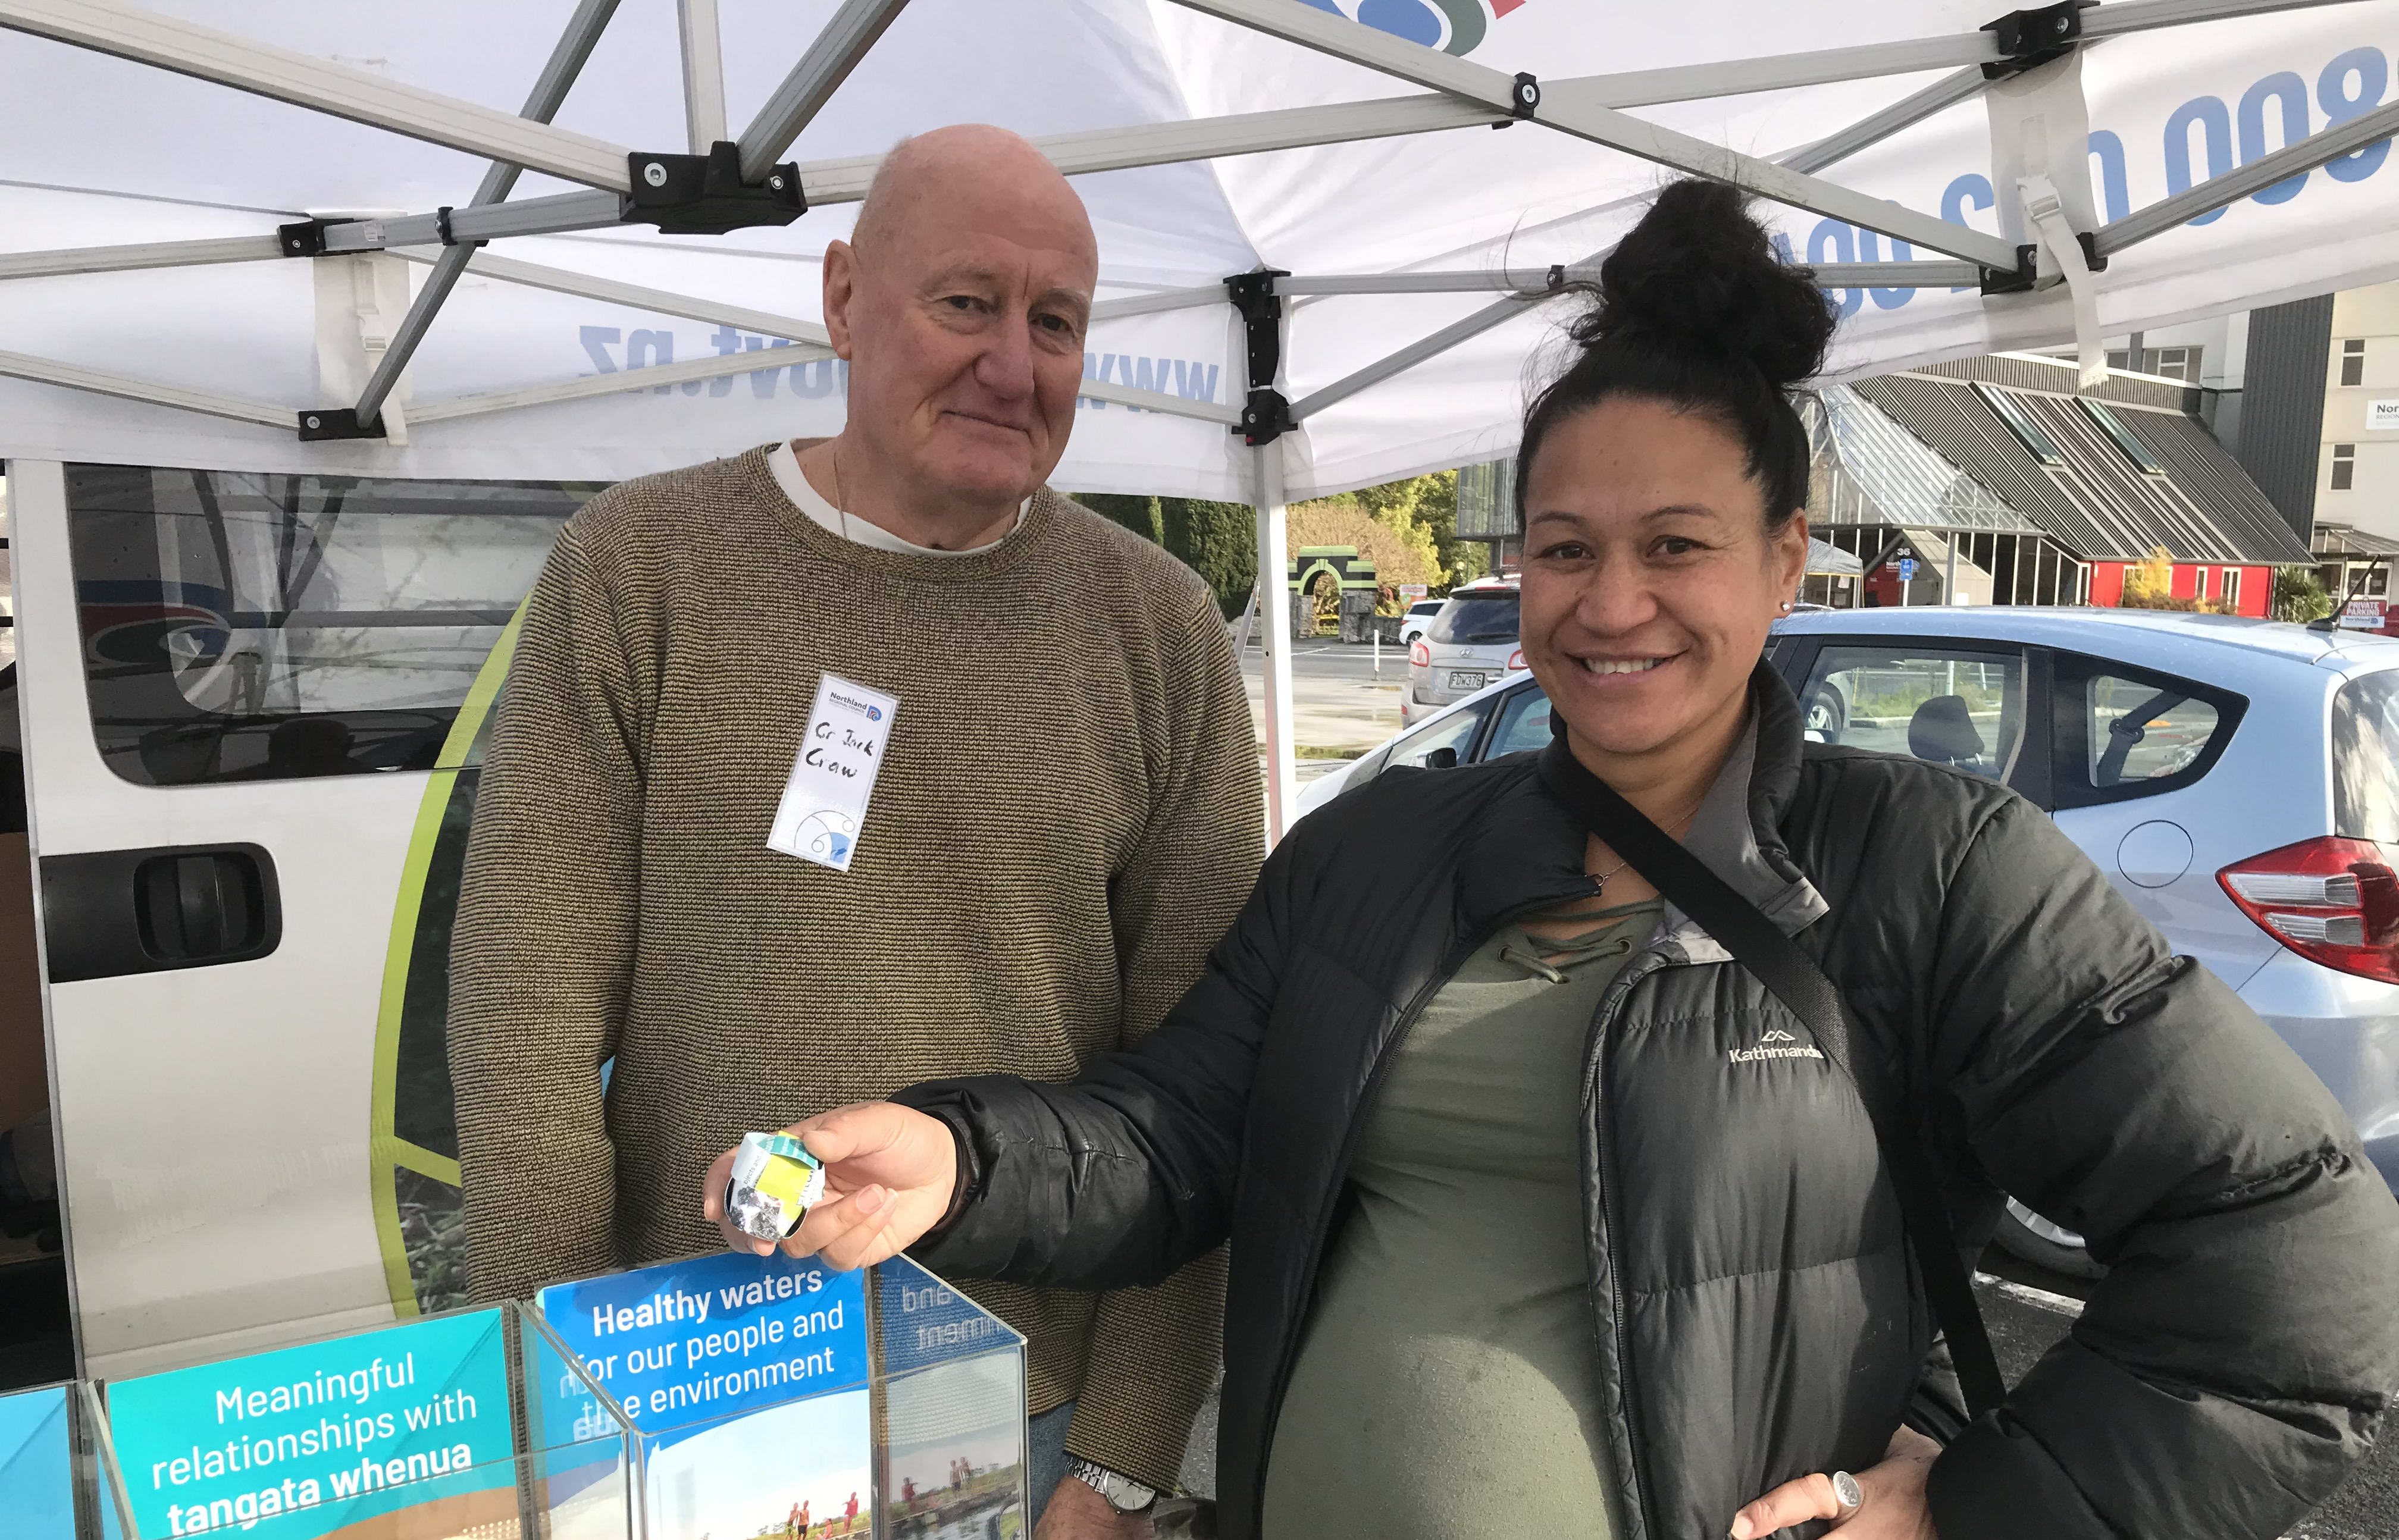 Whangarei’s Trish Matthews says looking after water’s definitely the most important thing for Northland Regional Council (NRC) to do in the next decade. She's seen here with NRC councillor Jack Craw at Whangarei growers market this weekend.